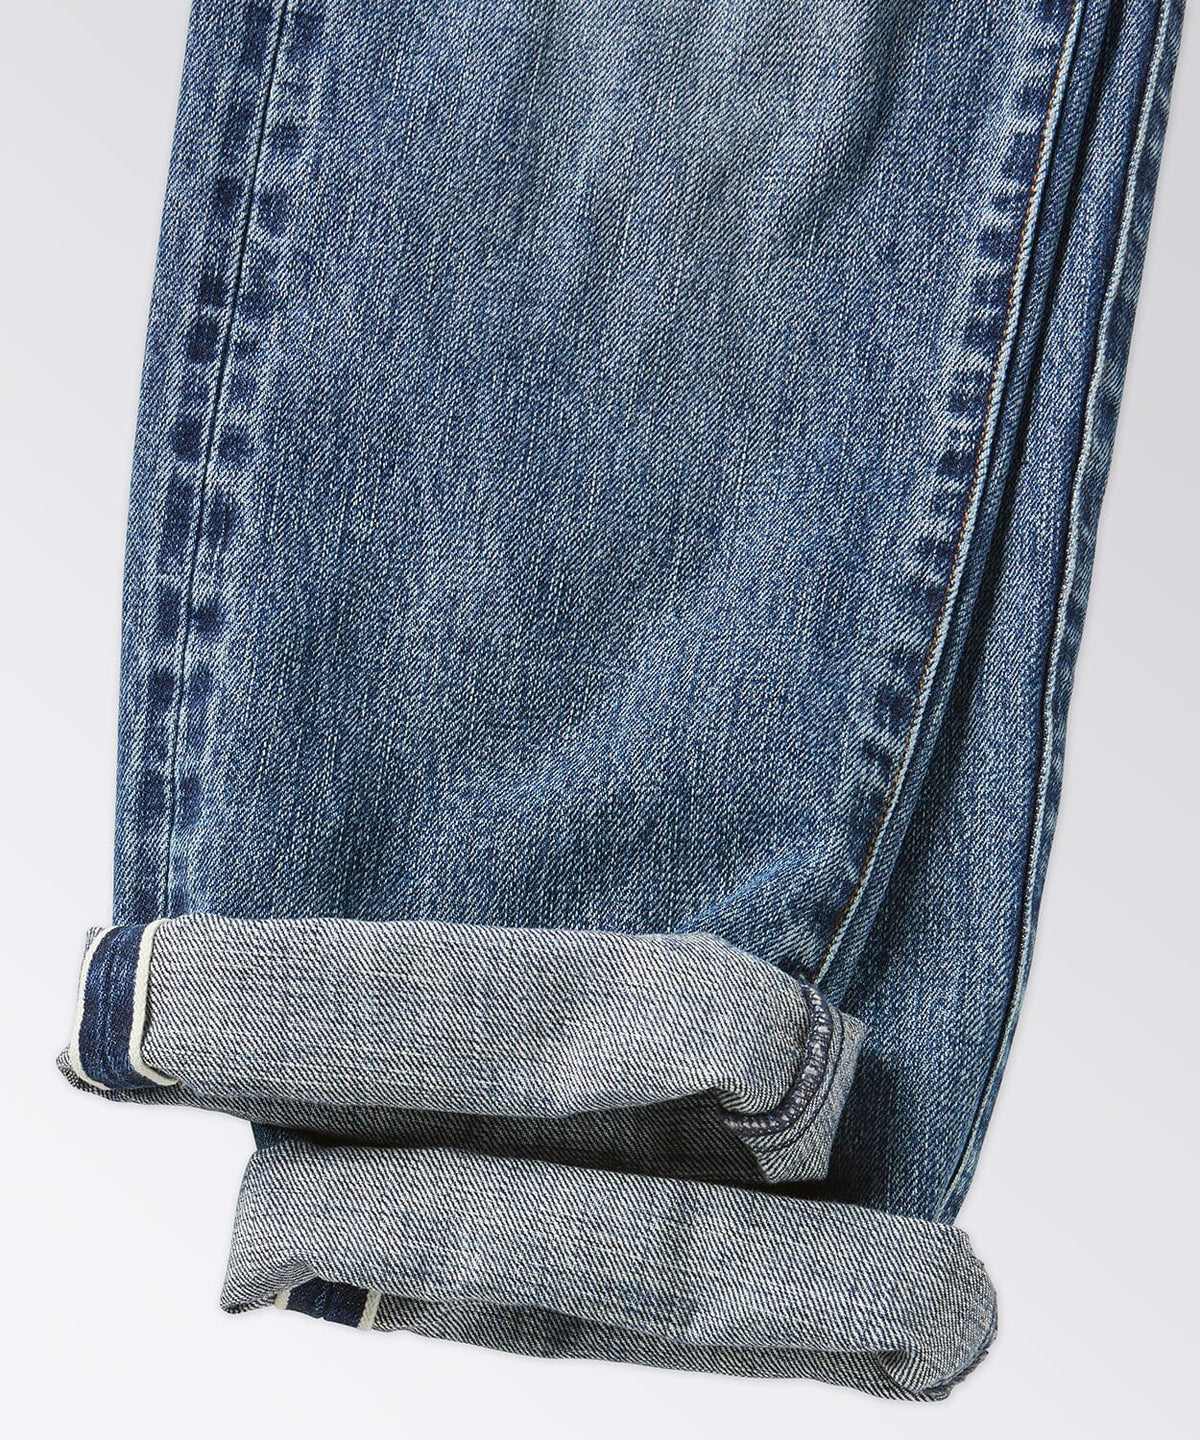 bottom of mens jeans distressed